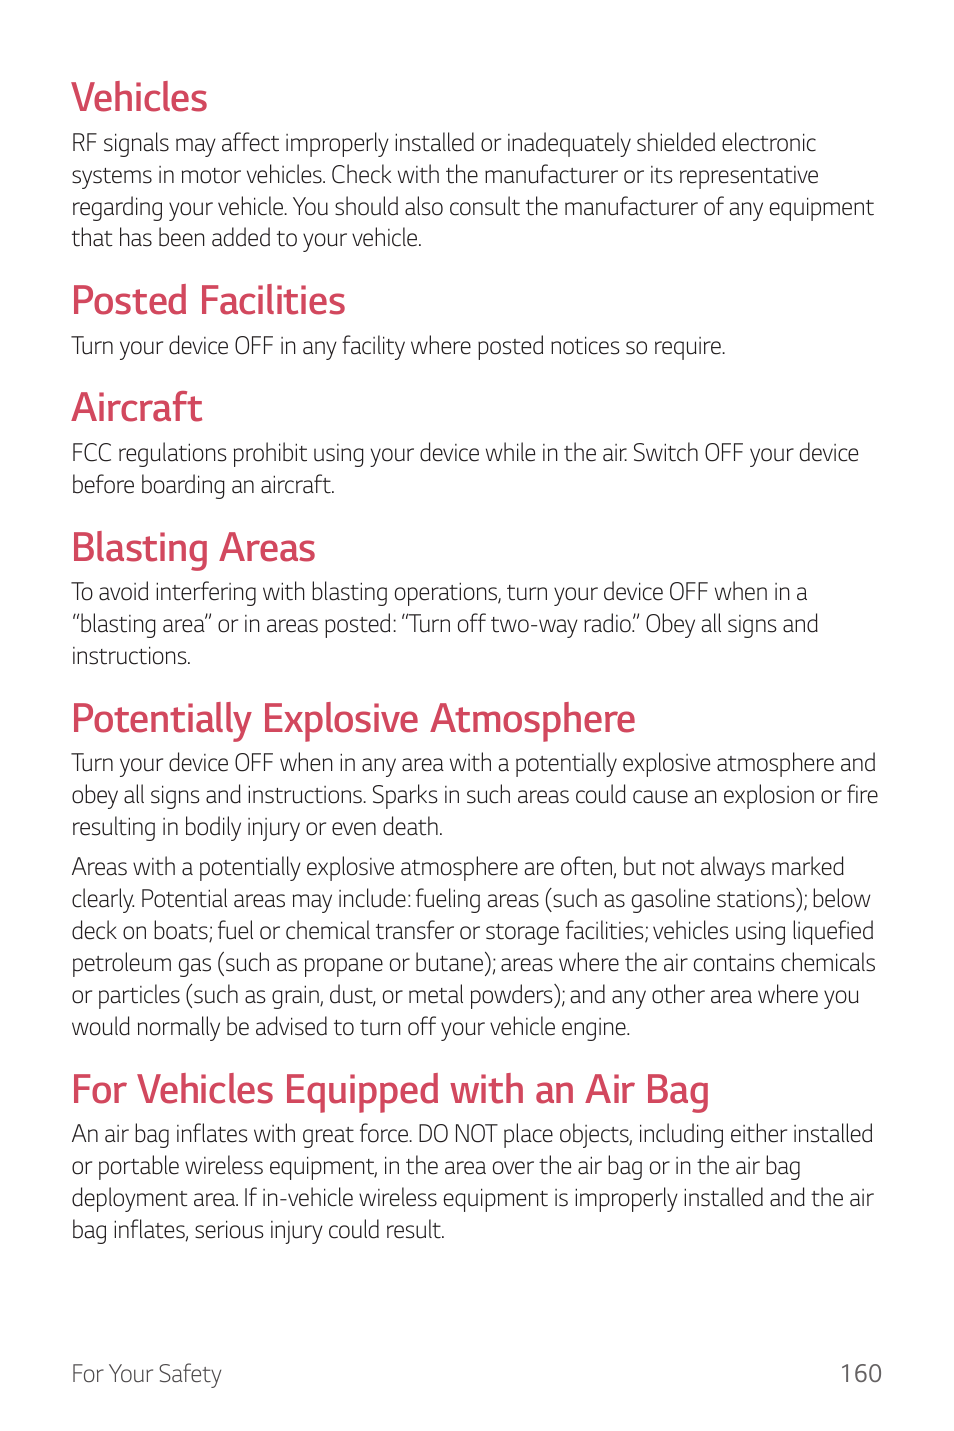 Vehicles, Posted facilities, Aircraft | Blasting areas, Potentially explosive atmosphere, For vehicles equipped with an air bag | LG G6 H872 User Manual | Page 161 / 183